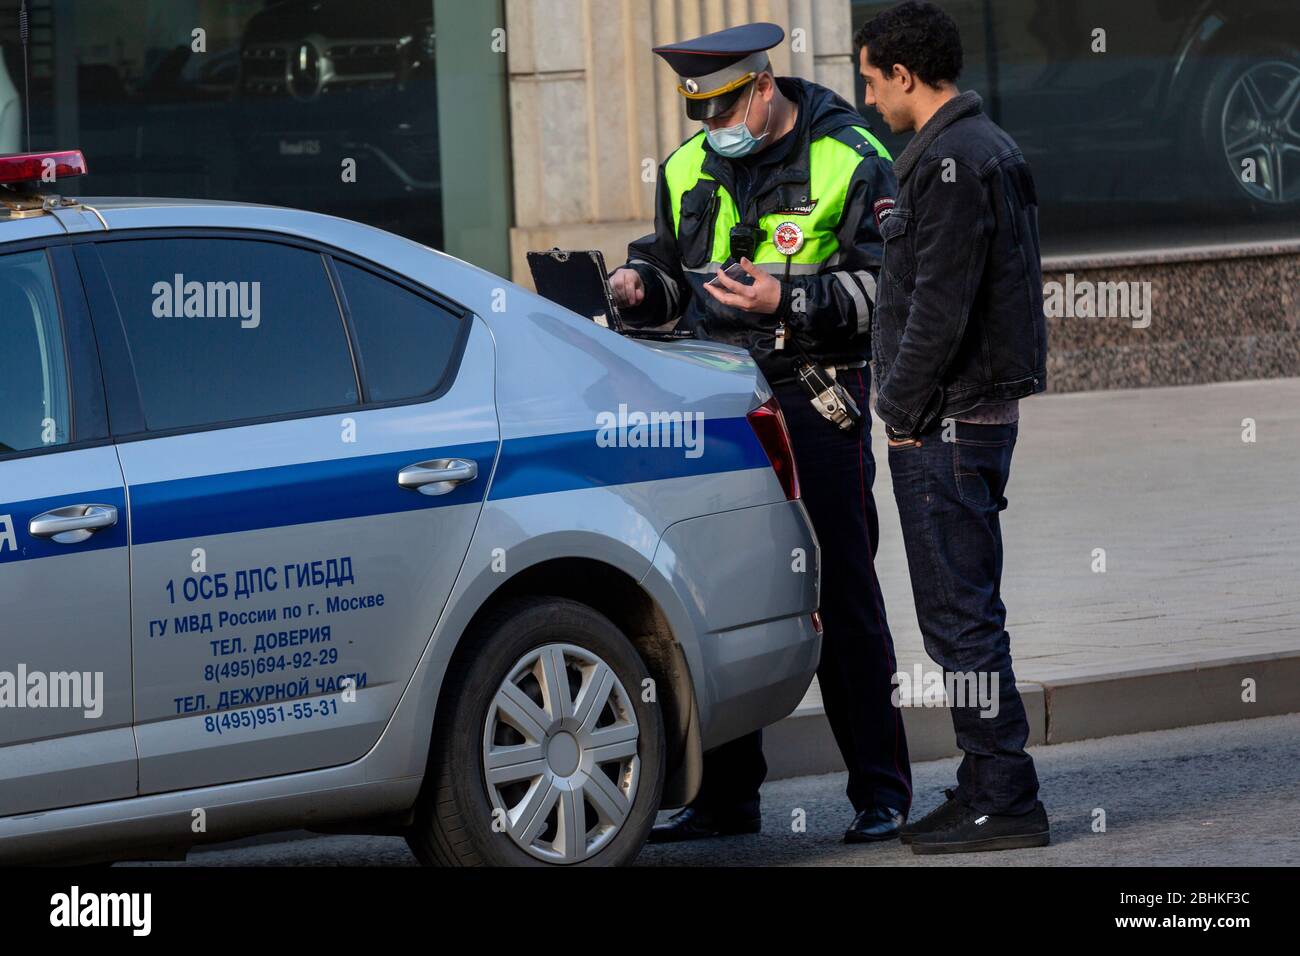 Moscow, Russia. 26th of April, 2020. Traffic police officer in face masks checks a driver's digital pass code during the pandemic of the novel coronavirus disease COVID-19. On 13 April 2020, the Moscow government introduced a digital permit system aimed at further restricting movement. Under the new scheme, which has become mandatory from 15 April, people need to apply for permits to travel on a vehicle or public transport around the city Stock Photo